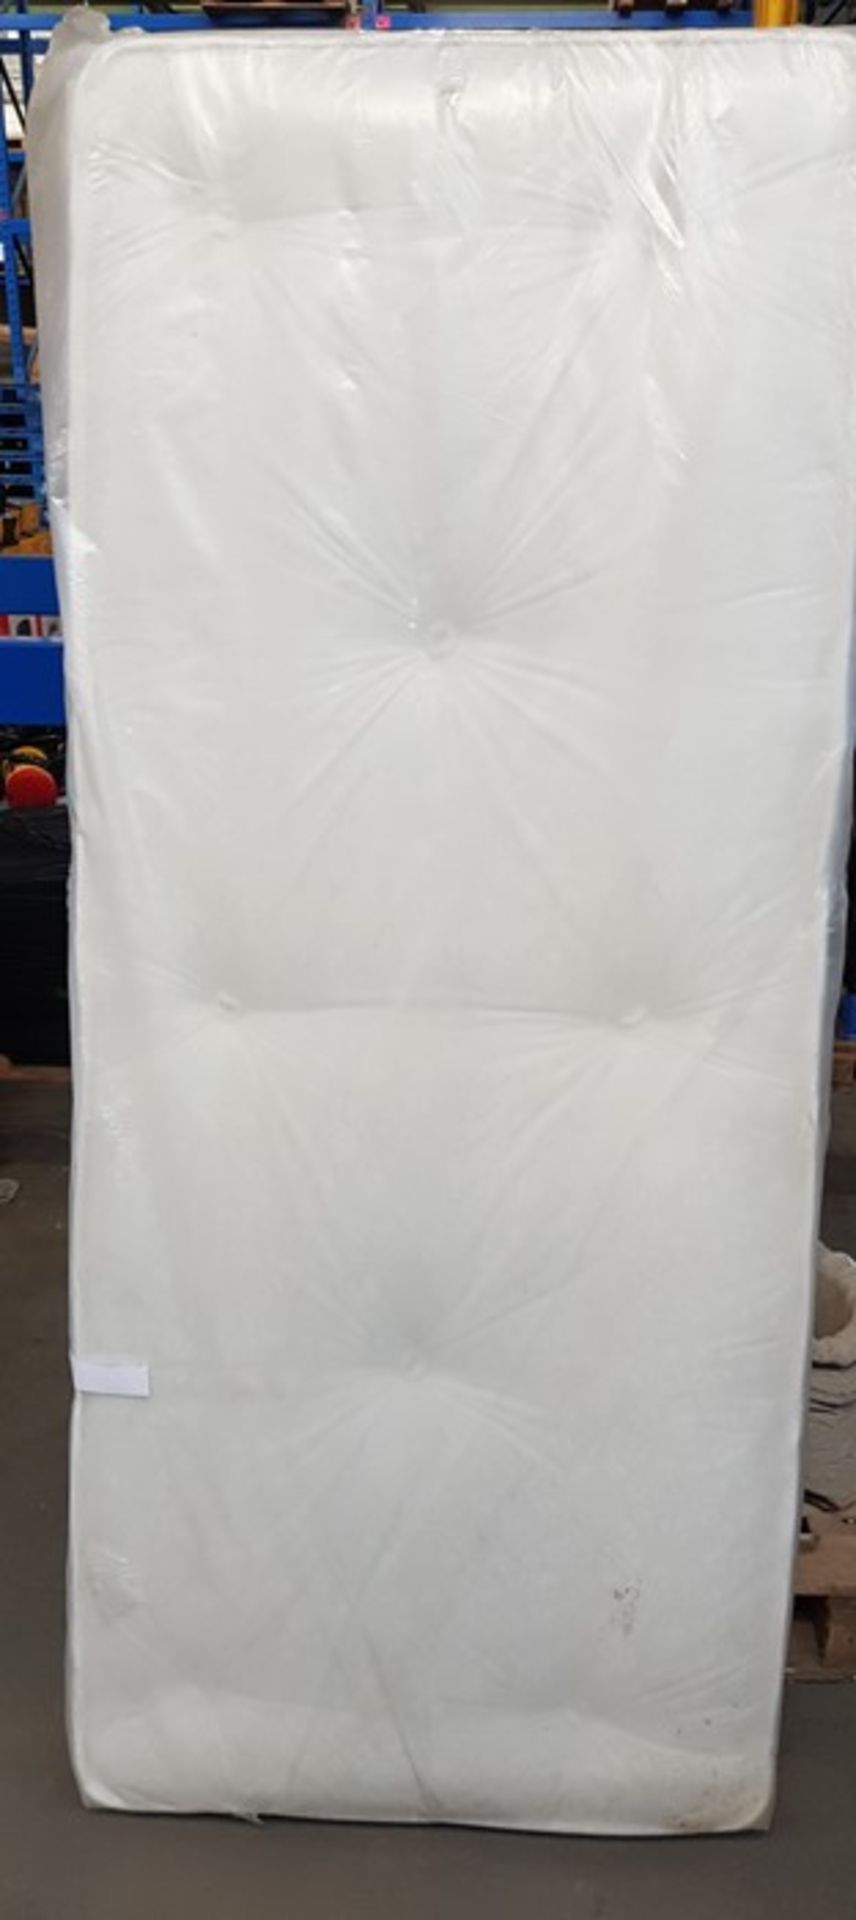 1 BAGGED 75CM SMALL SINGLE POCKET SPRUNG MATTRESS / RRP £59.00 (PUBLIC VIEWING AVAILABLE)